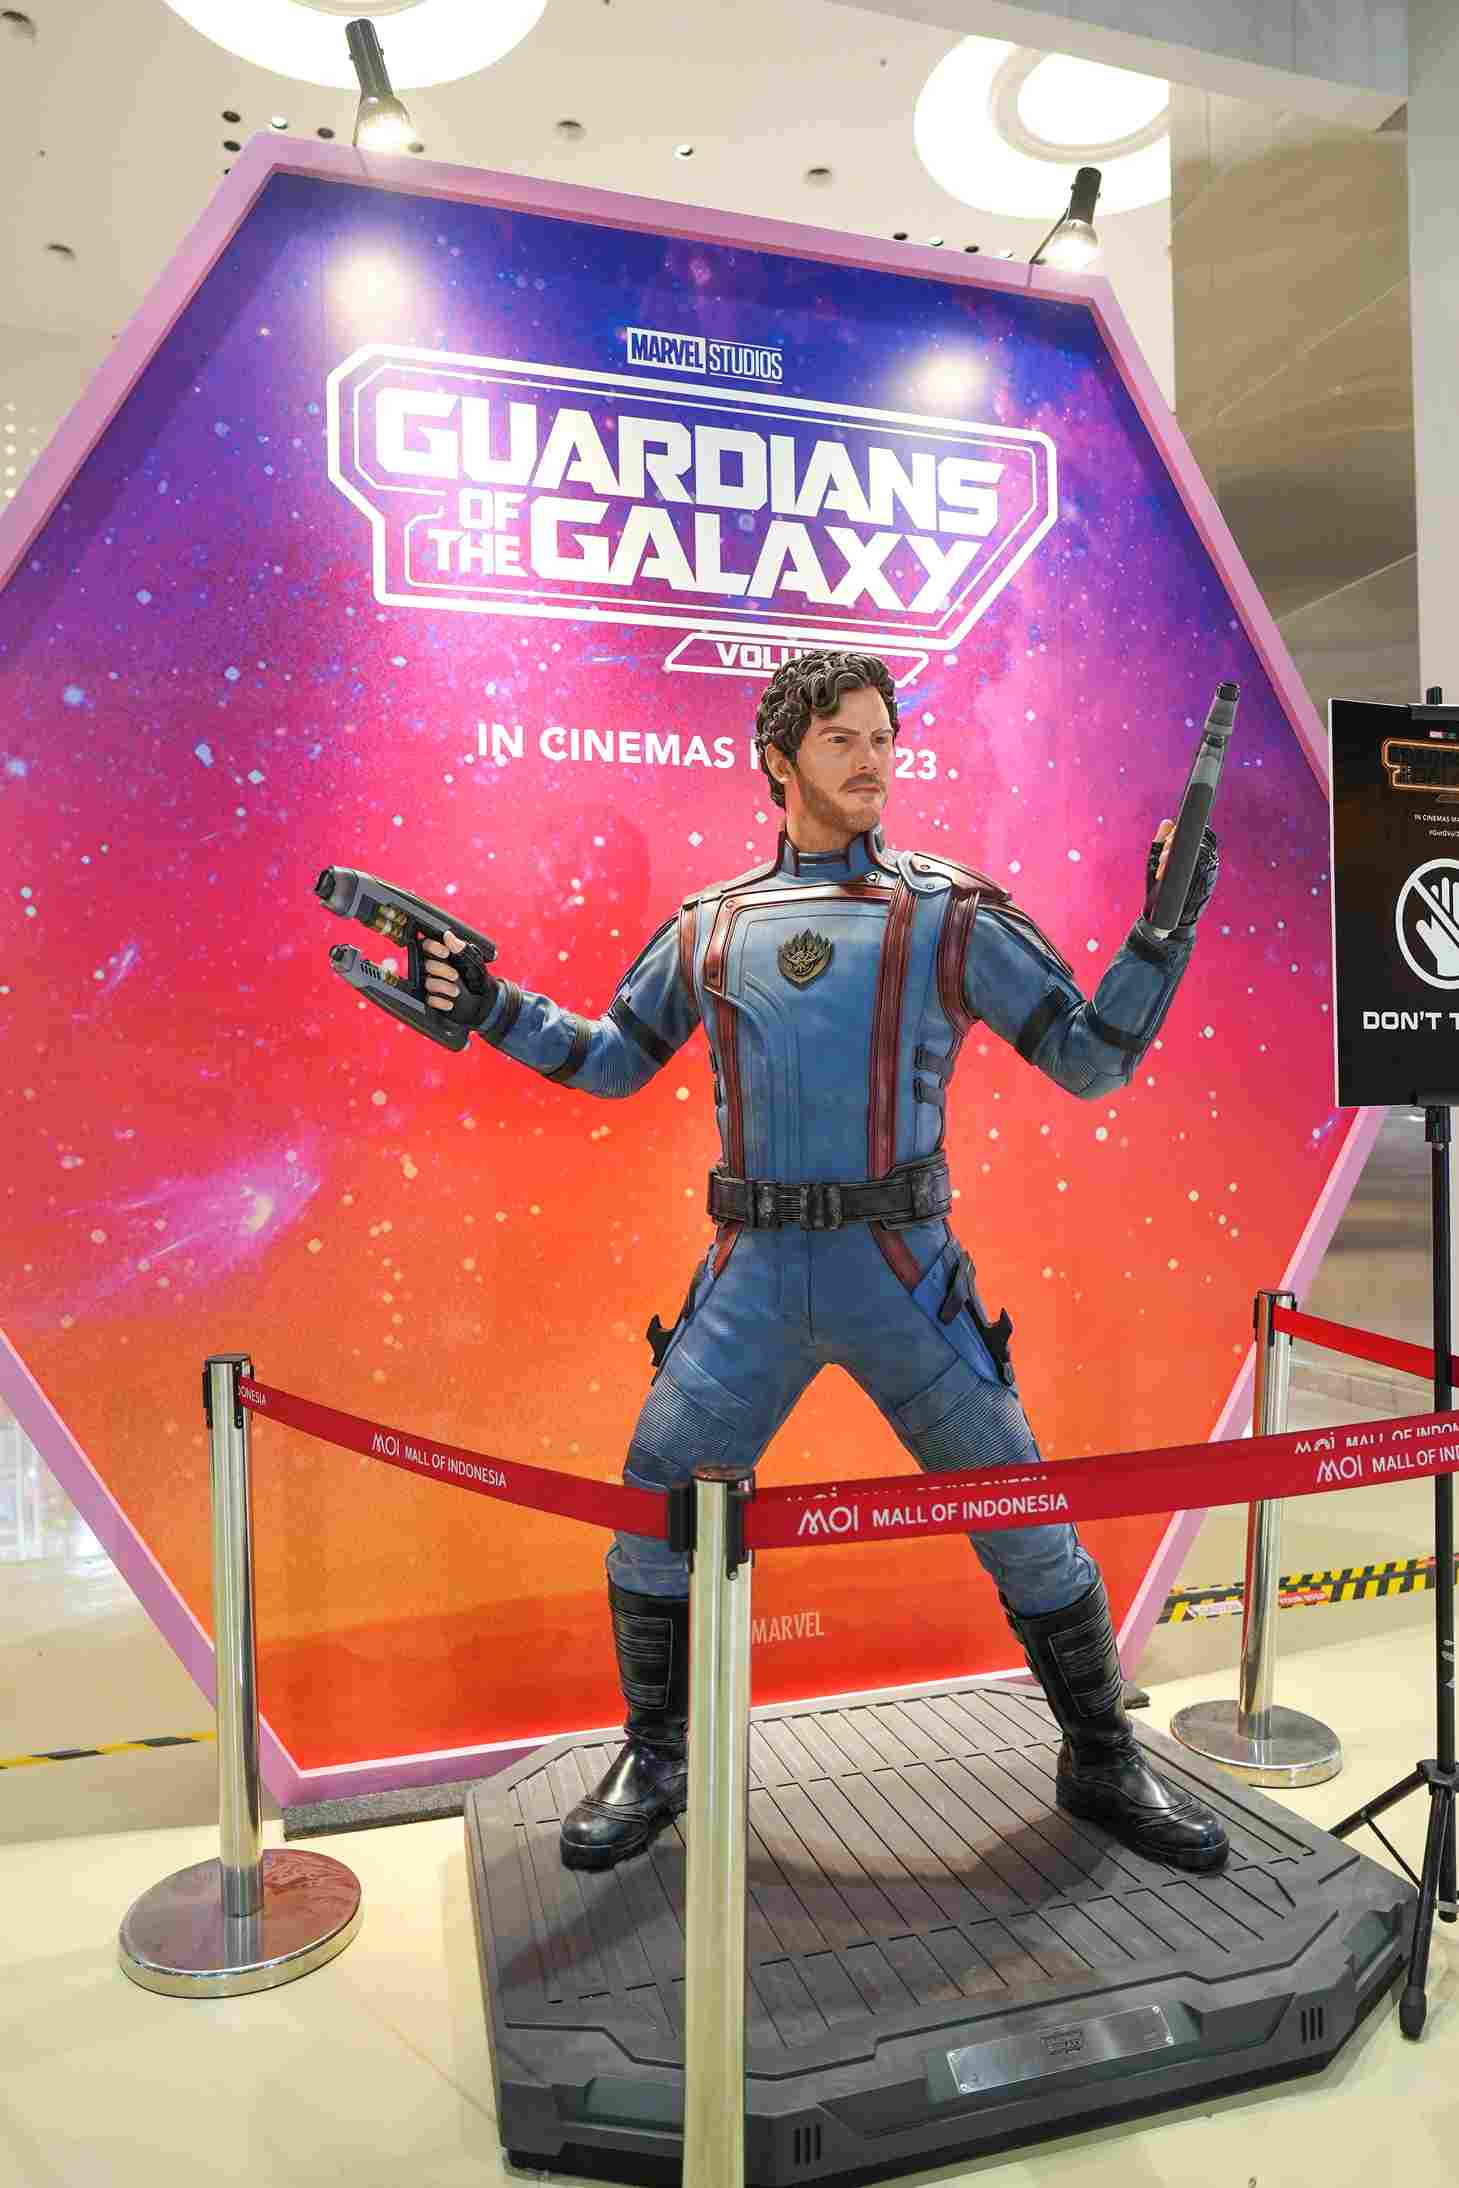 Mall Exhibition Guardians of The Galaxy Vol.3. Marvel. Disney. Mall of Indonesia. Peter Quill.